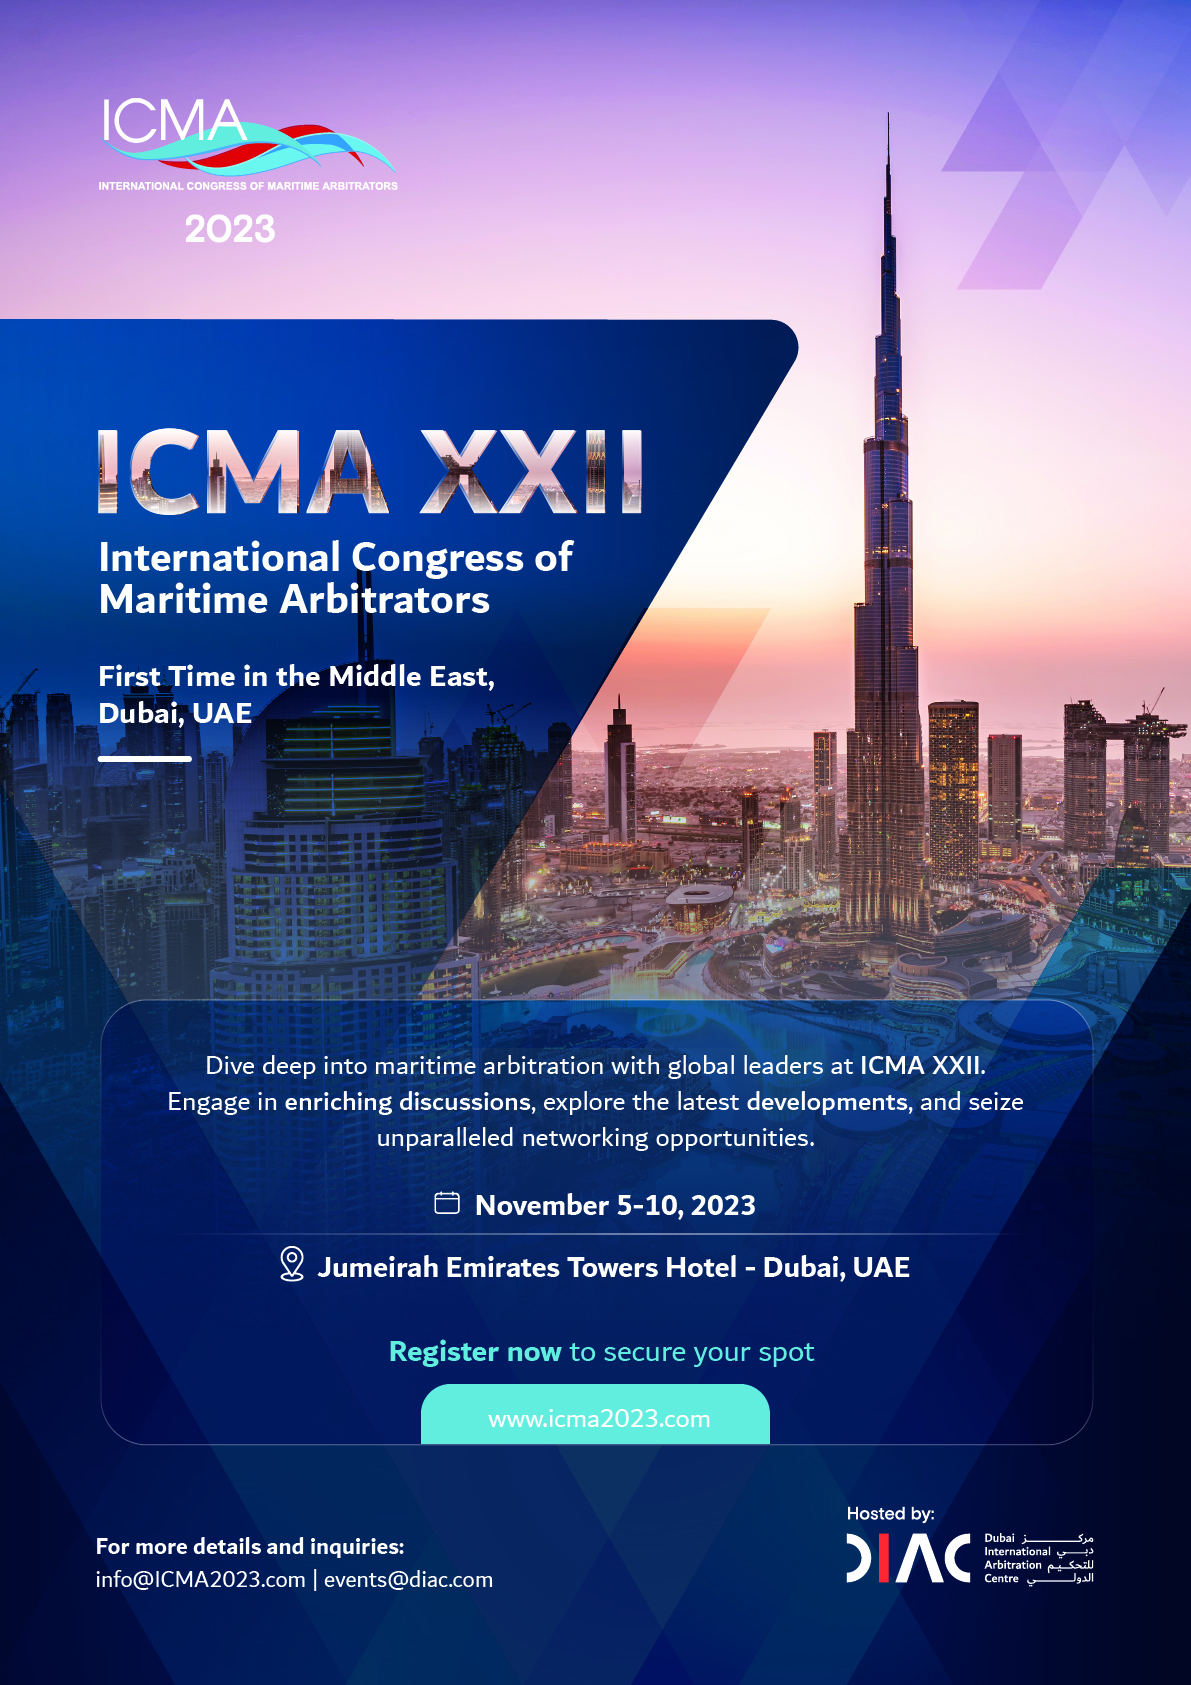 ICMA XXII in Dubai: First time in the Middle East